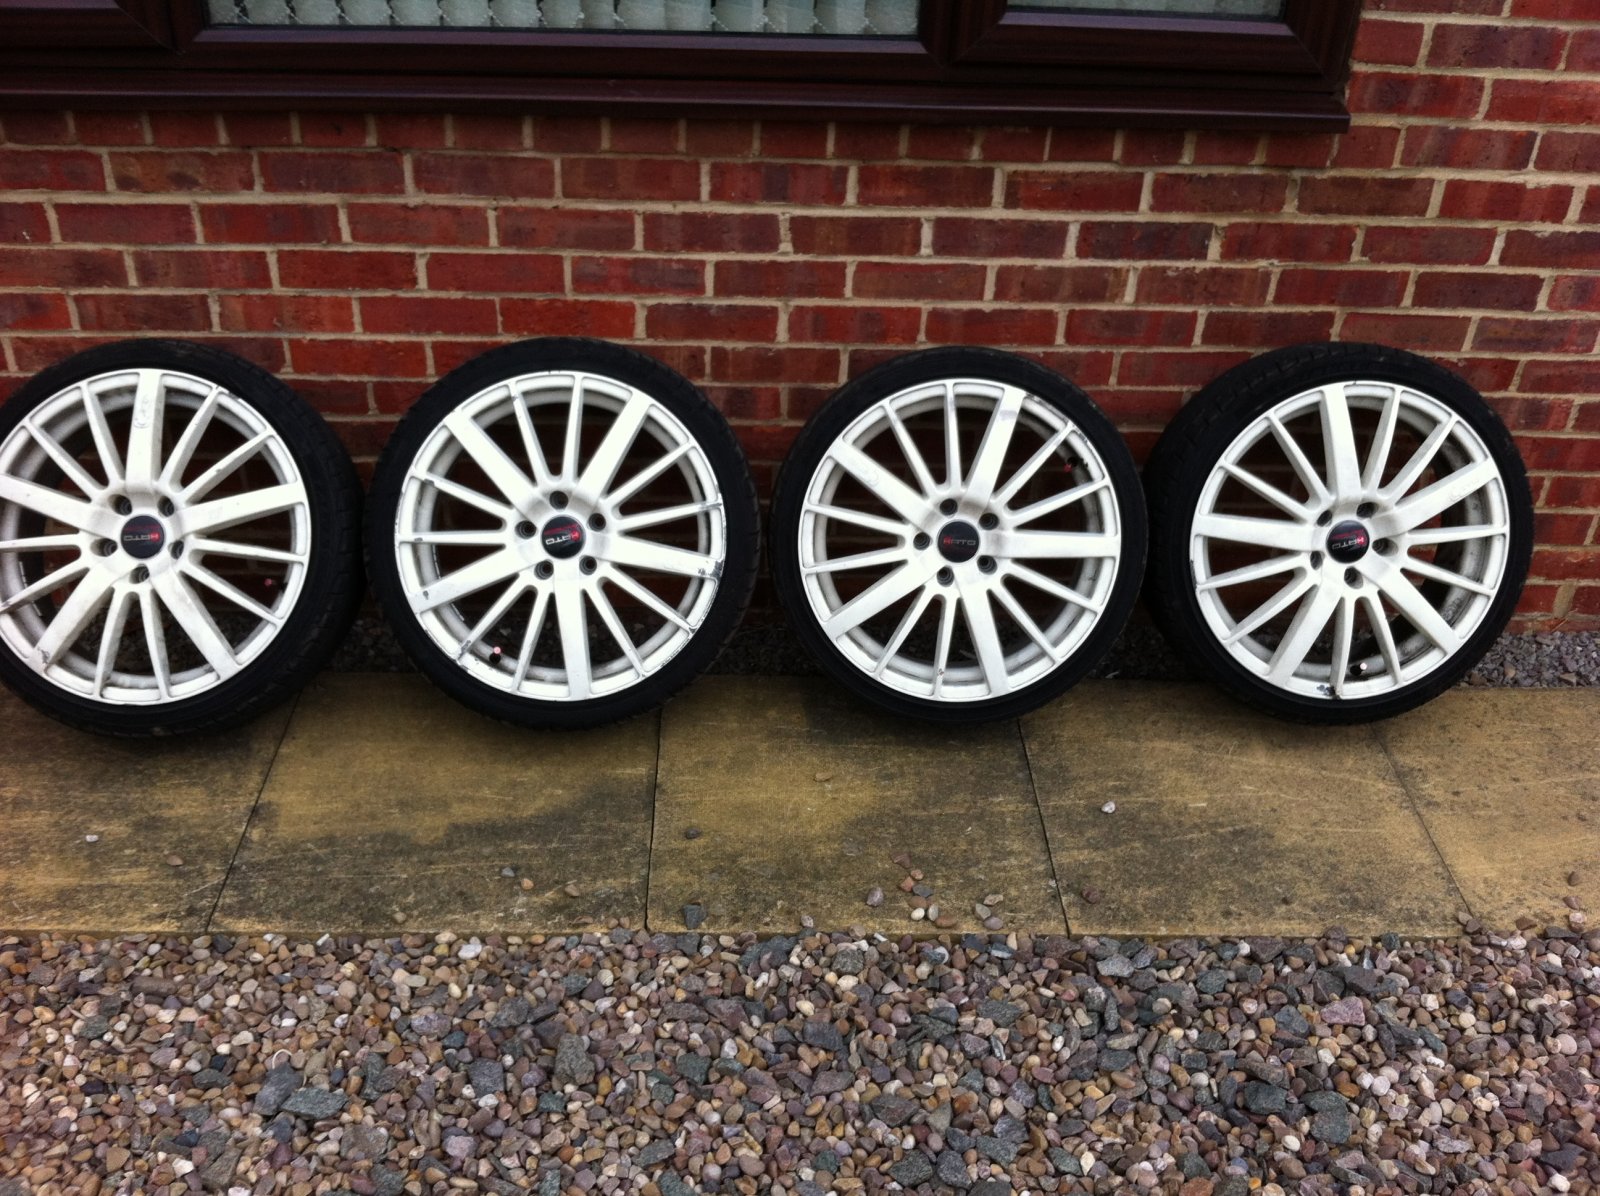 Hato Racing 18' 5 stud 114.3pcd wheels and tyres